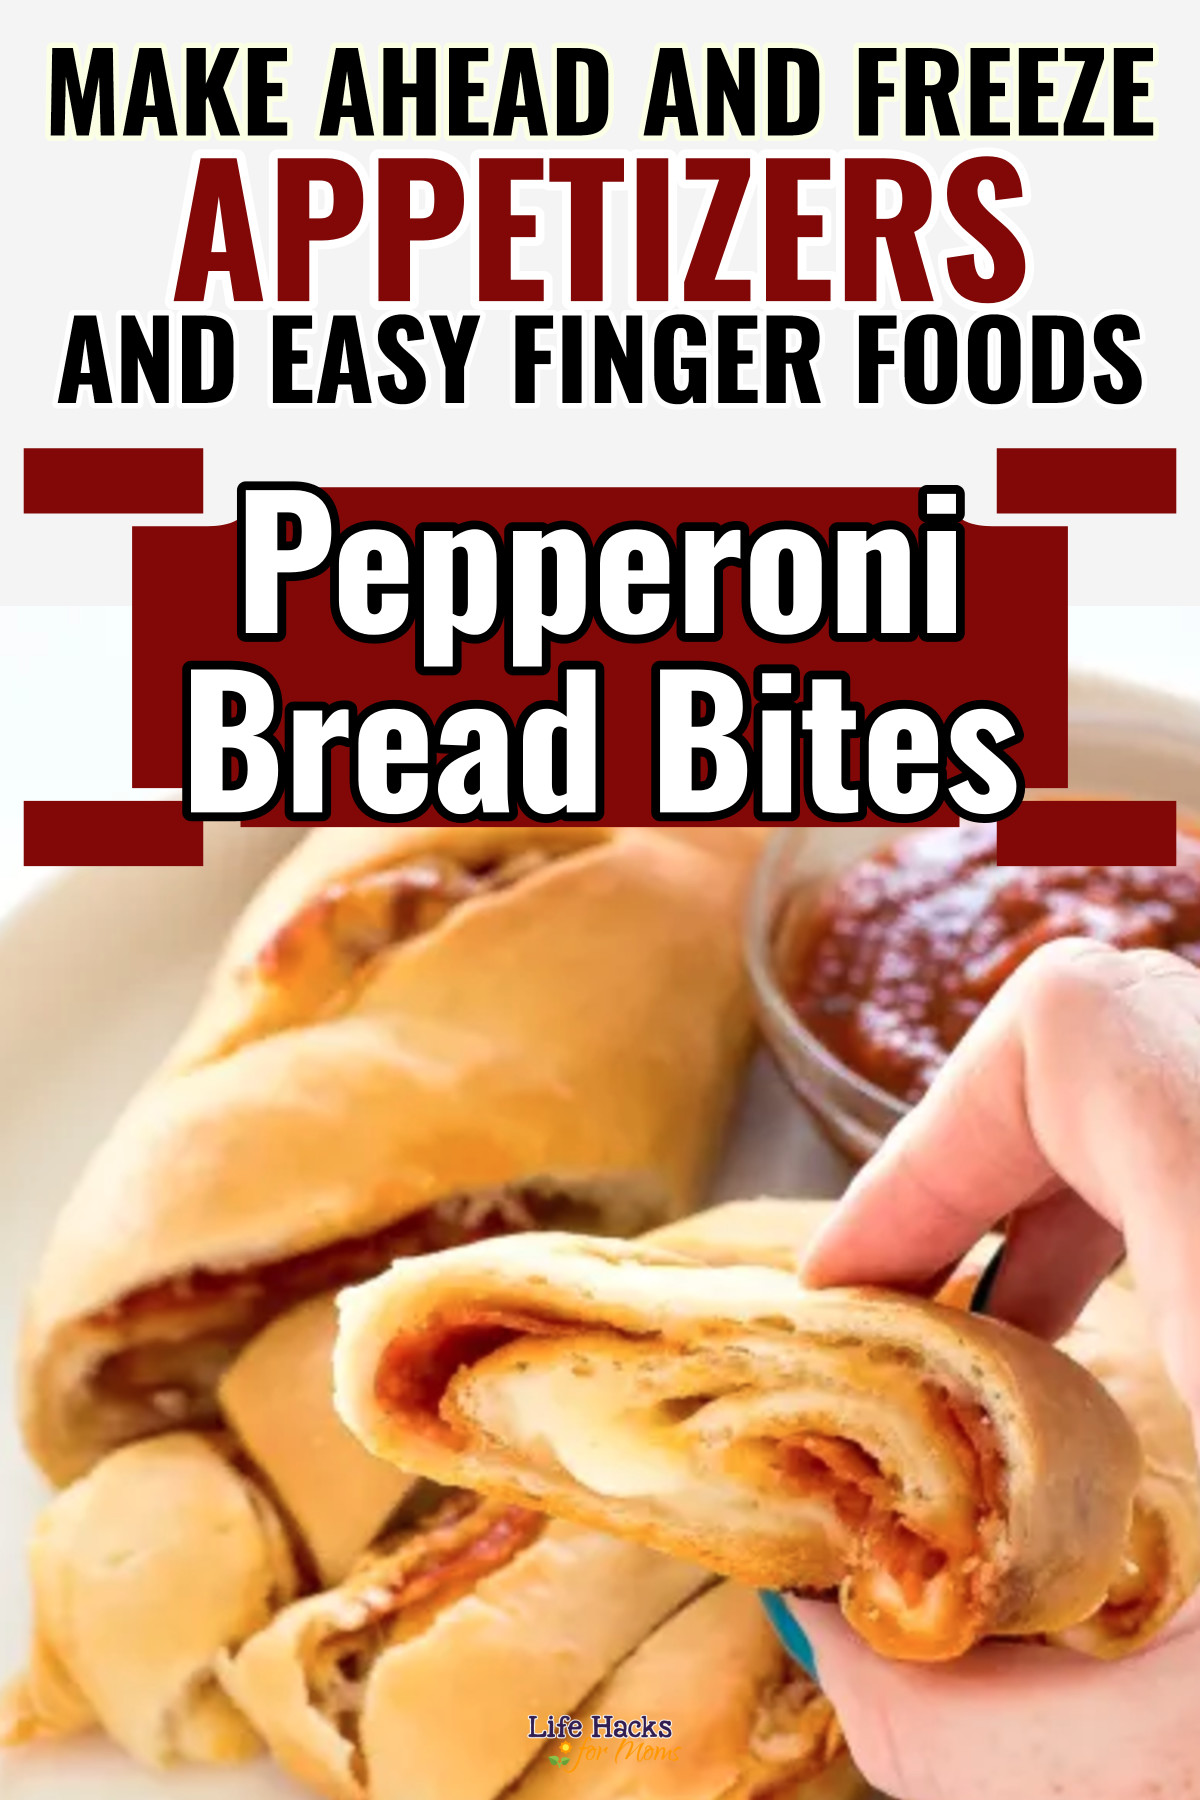 Make Ahead And Freeze Appetizers - Pepperoni Bread Bites